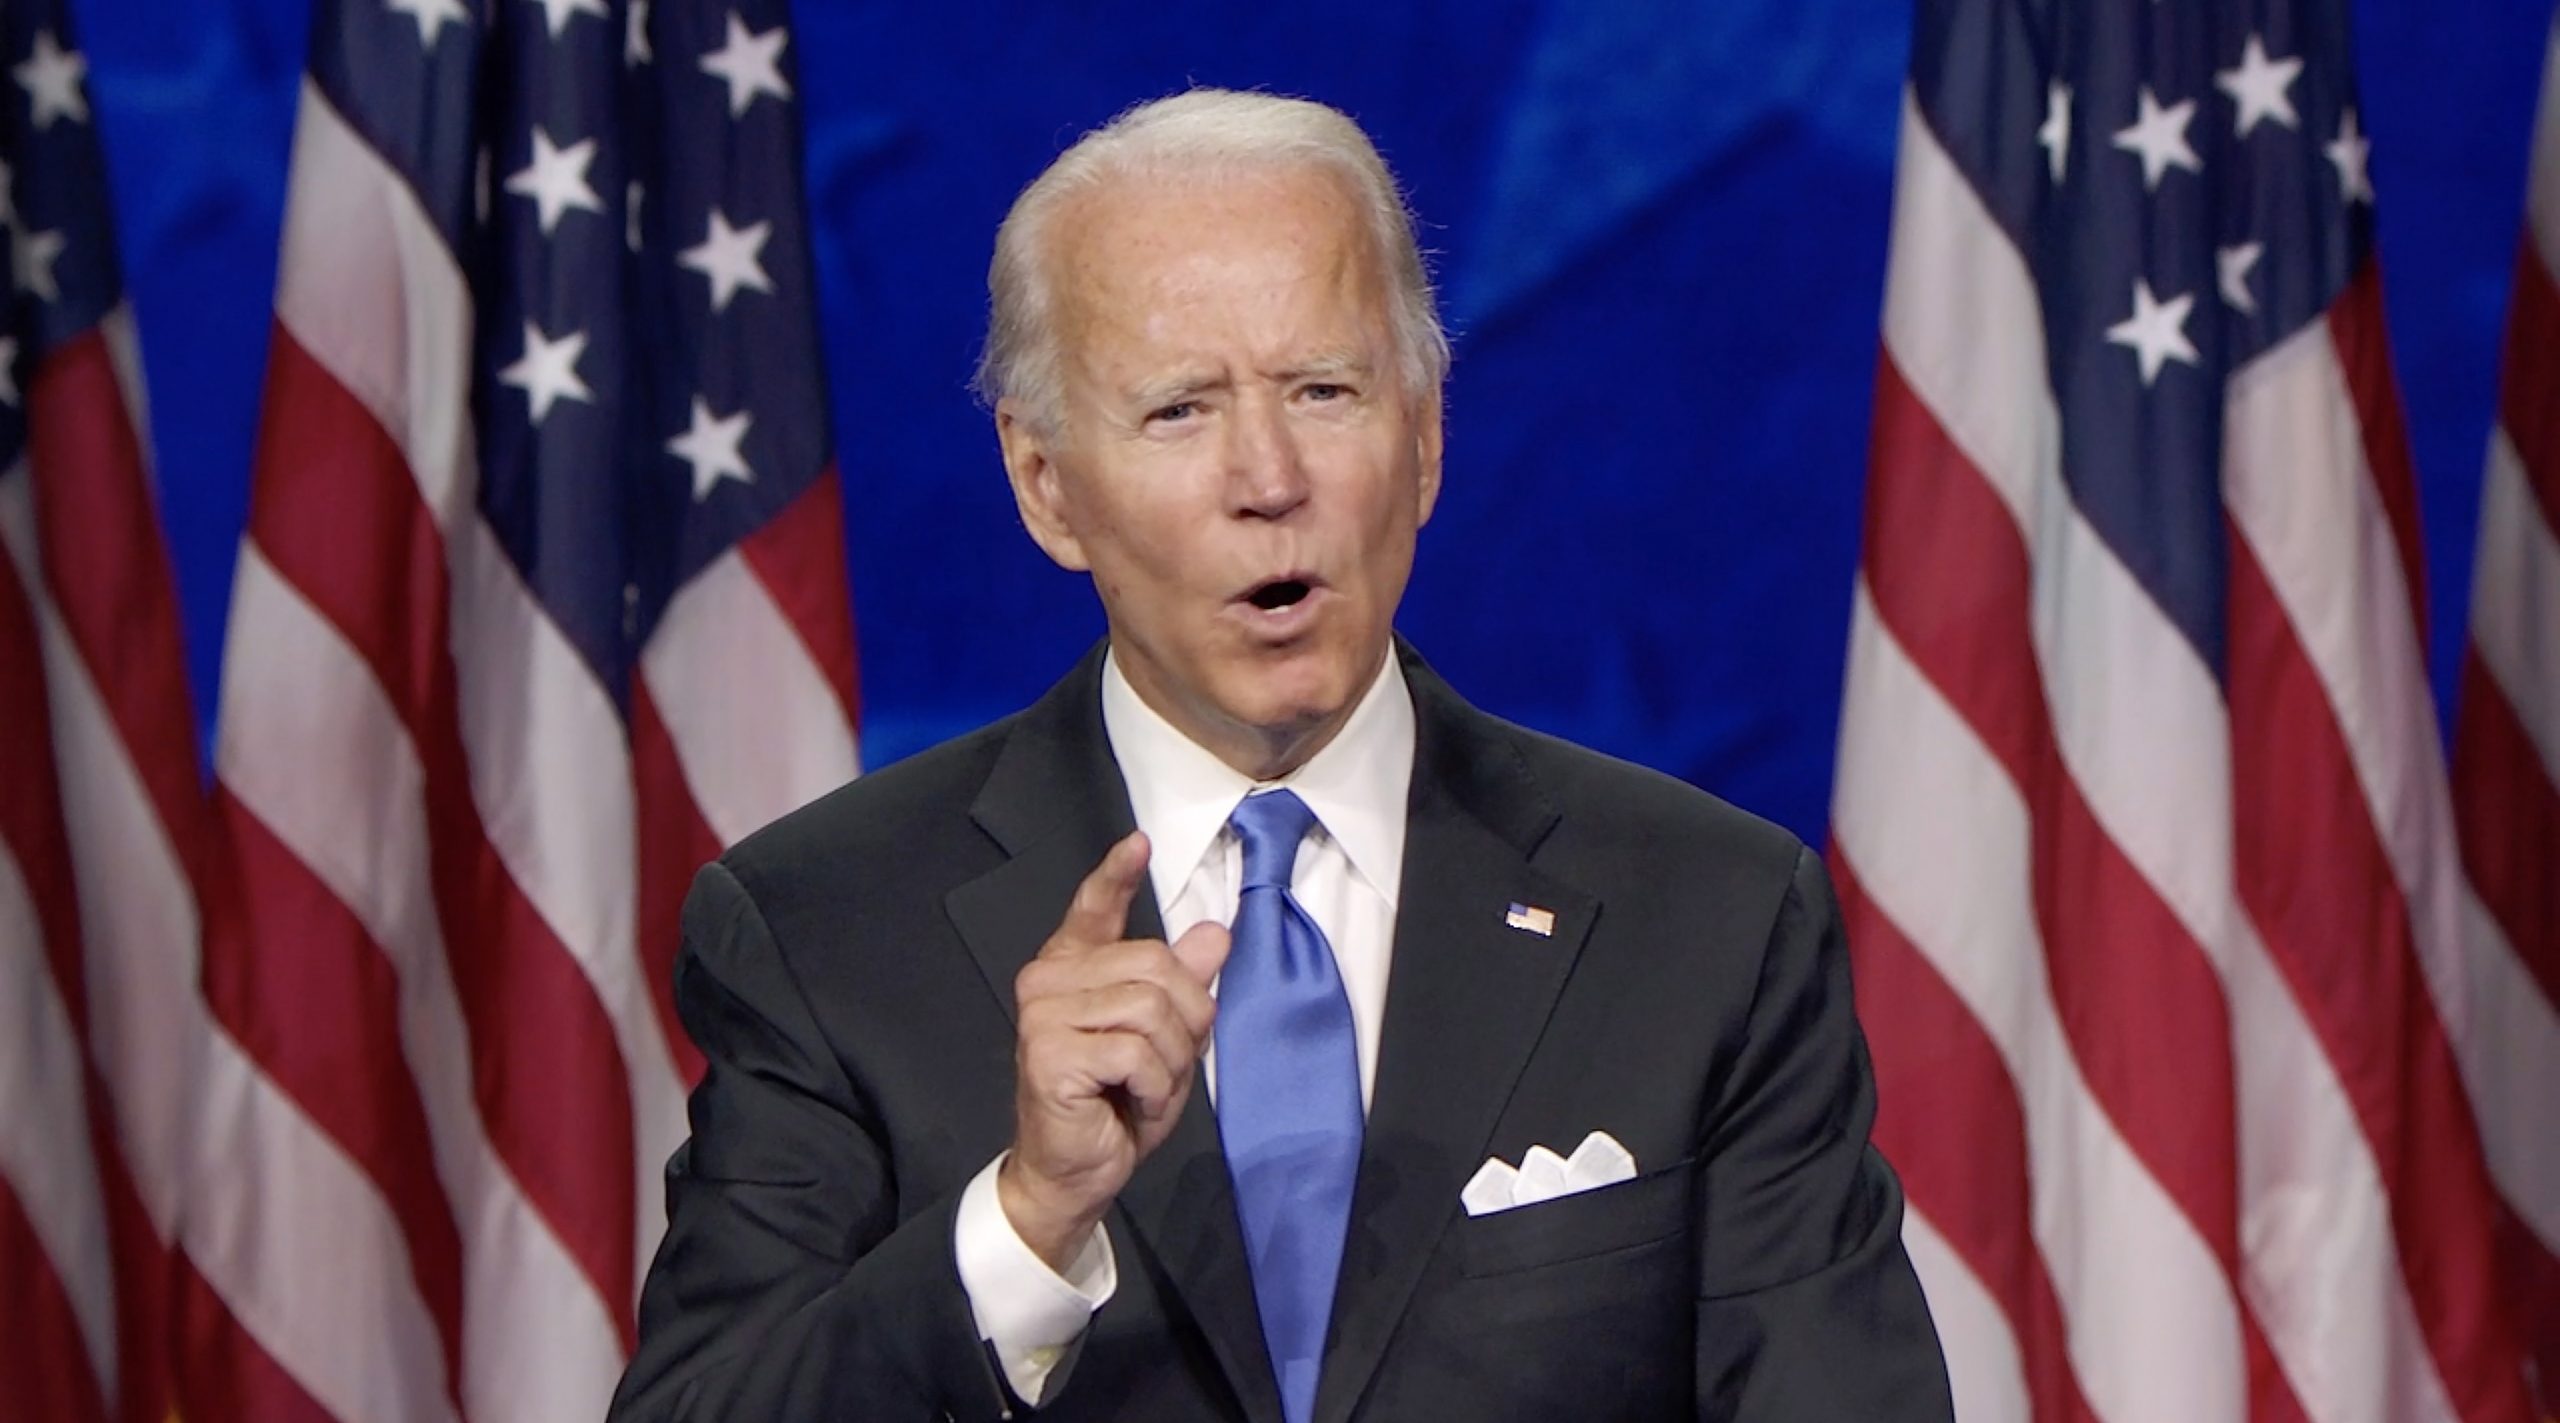 epa08615685 A framegrab from the Democratic National Convention Committee livestream showing Joe Biden speaking during the final night of the 2020 Democratic National Convention (DNC) in Milwaukee, Wisconsin, USA, 20 August 2020. The convention, which was expected to draw 50,000 people to the city, is now taking place virtually due to coronavirus pandemic concerns.  EPA/DNCC